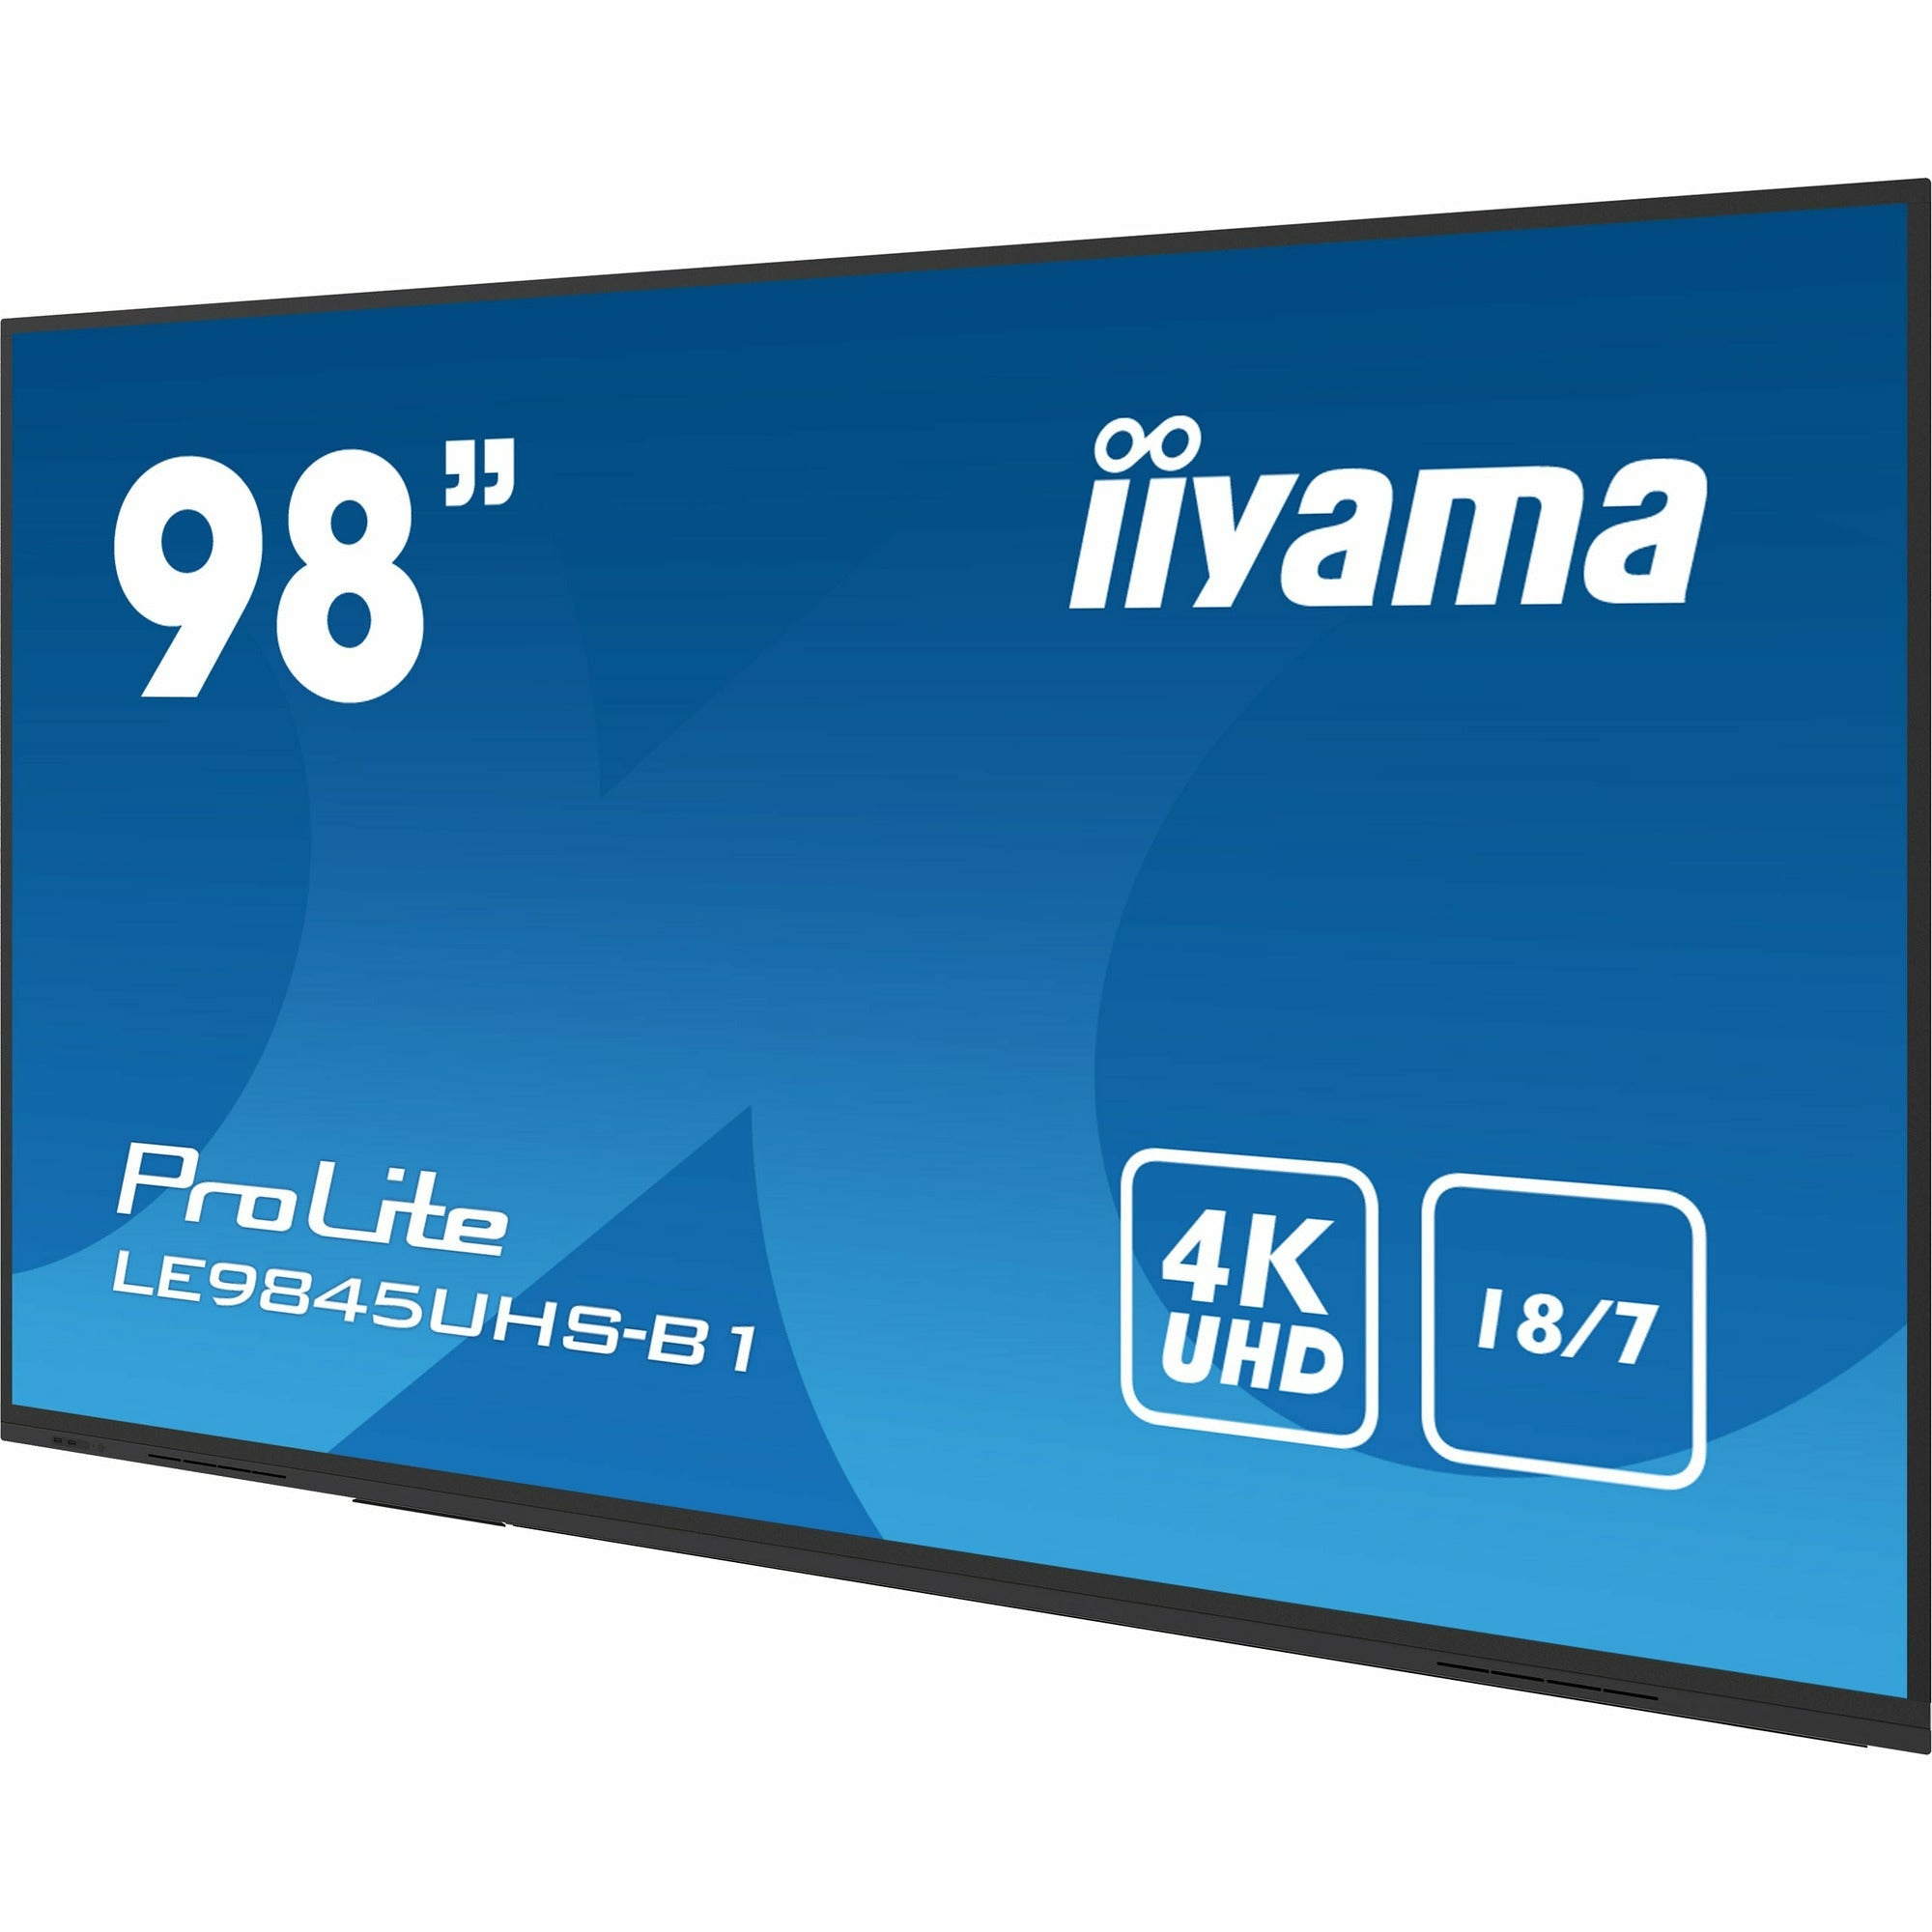 iiyama ProLite LE9845UHS-B1 98’’ 4K UHD Professional Signage Display, featuring Android OS, 18/7 Operation, E-Share / ScreenShare, Landscape Only